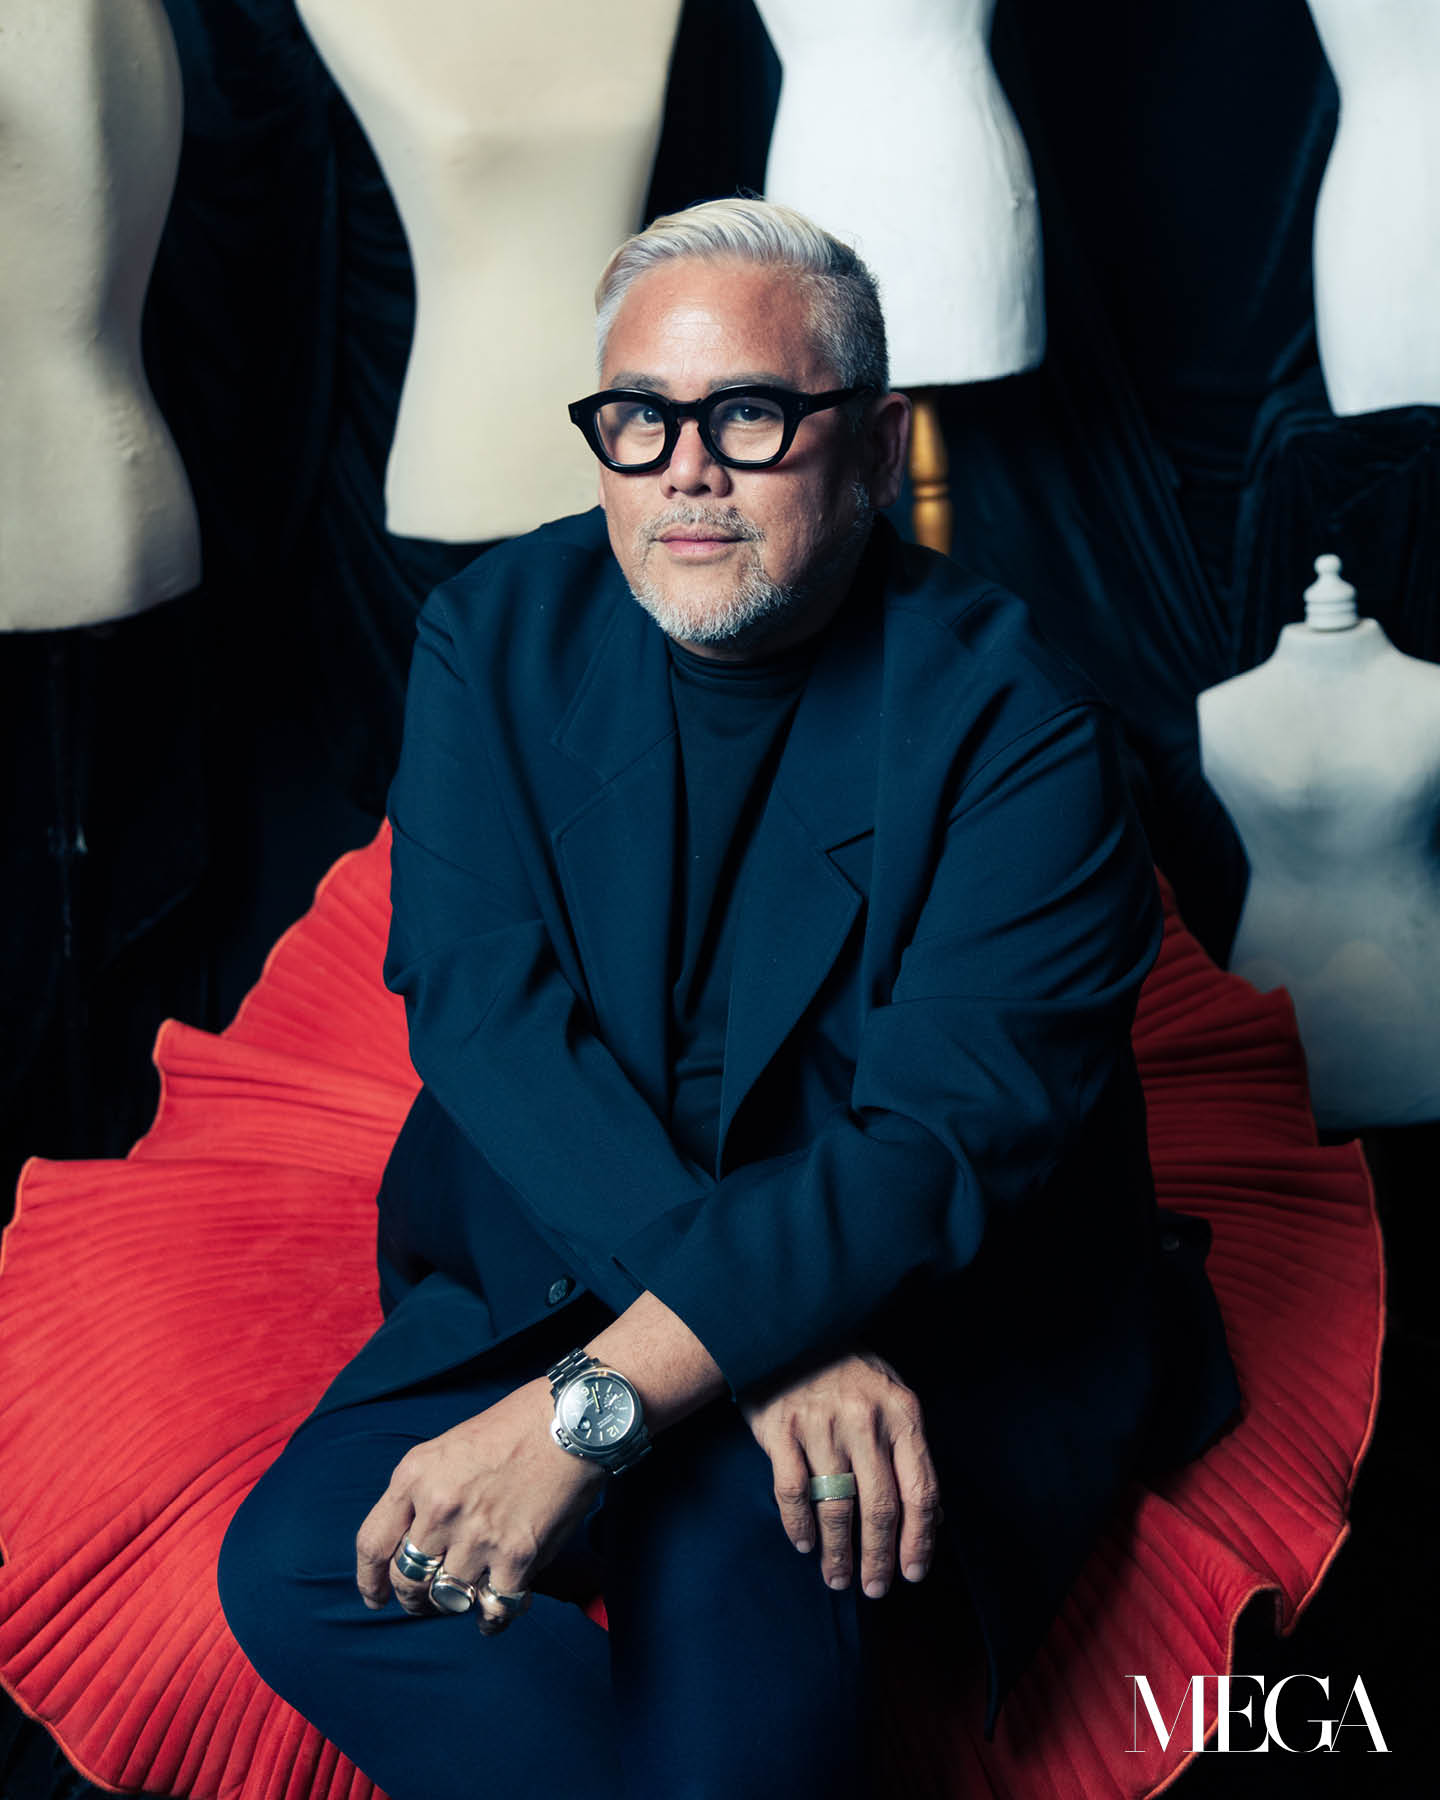 Rajo Laurel's Journey With the MEGA Young Designers Competition